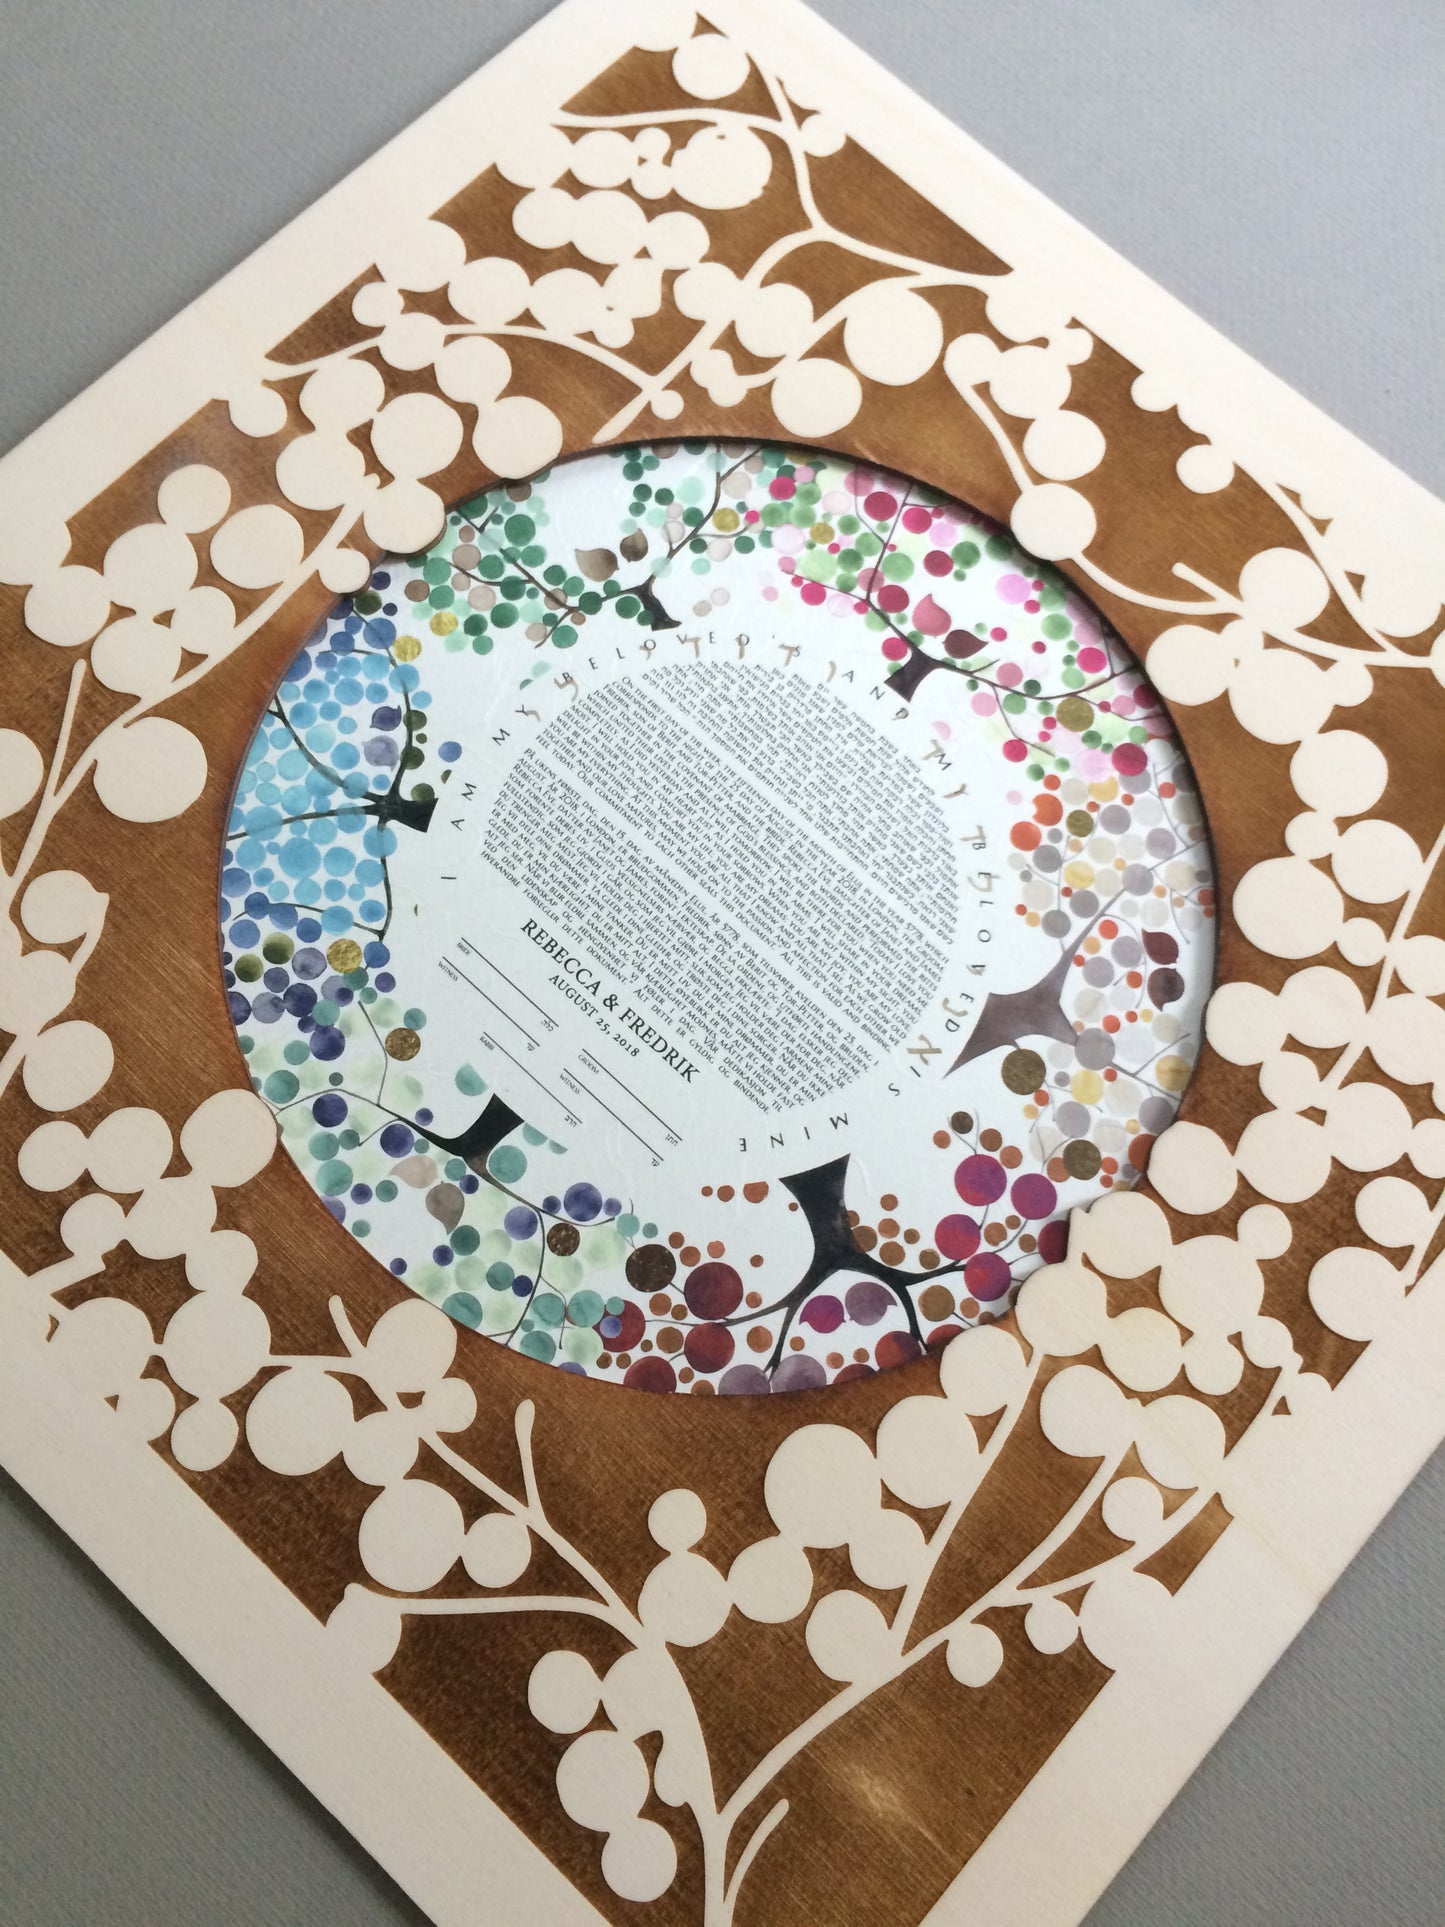 Reserved listing for Aaron G. - Custom engraved woodcut Ketubah with printed text and design